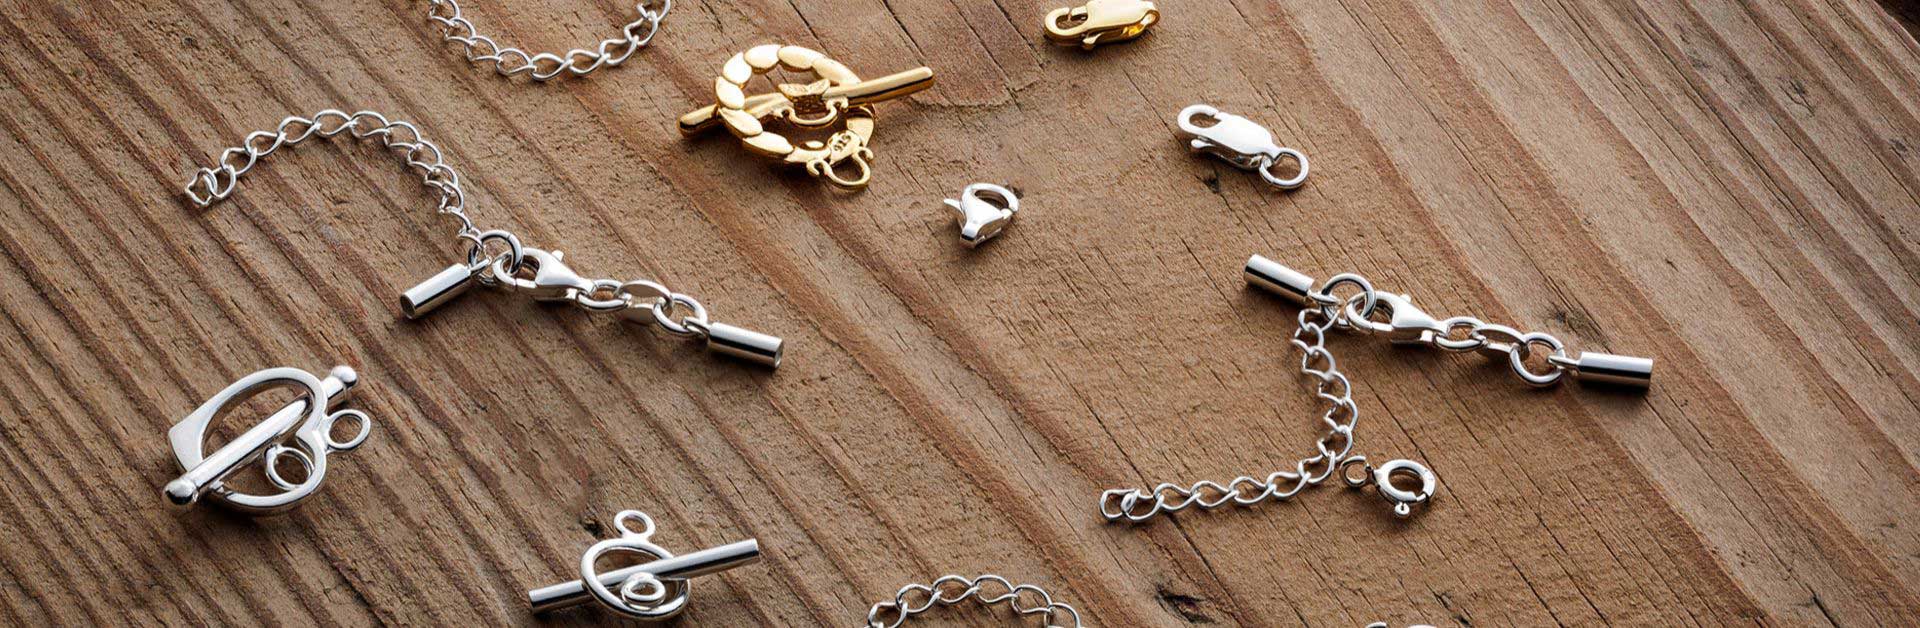 chain clasp types